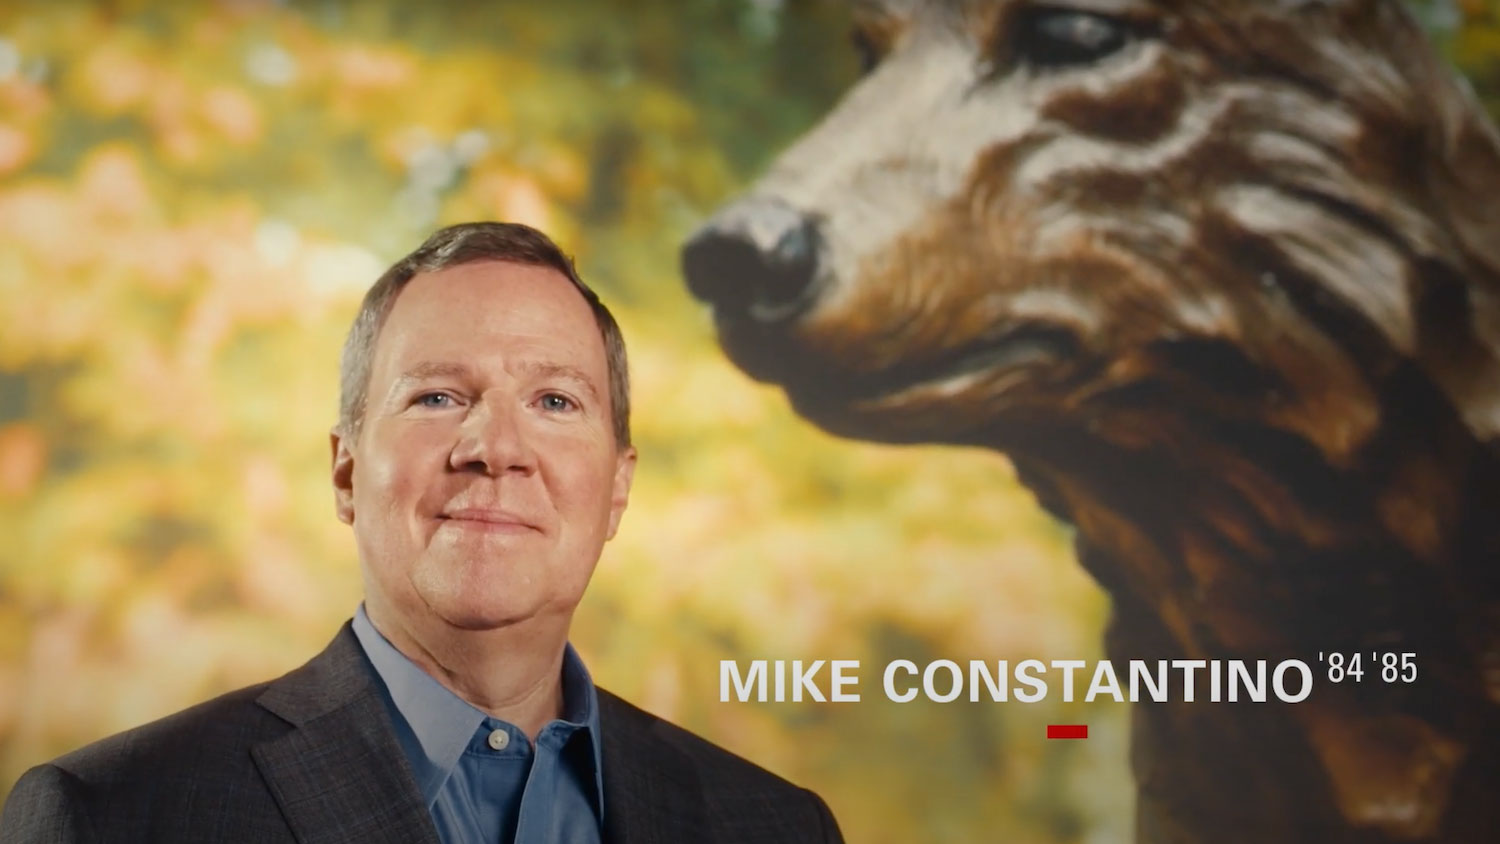 Mike Constantino in front of a background of a wolf statue and his name and graduation years listed